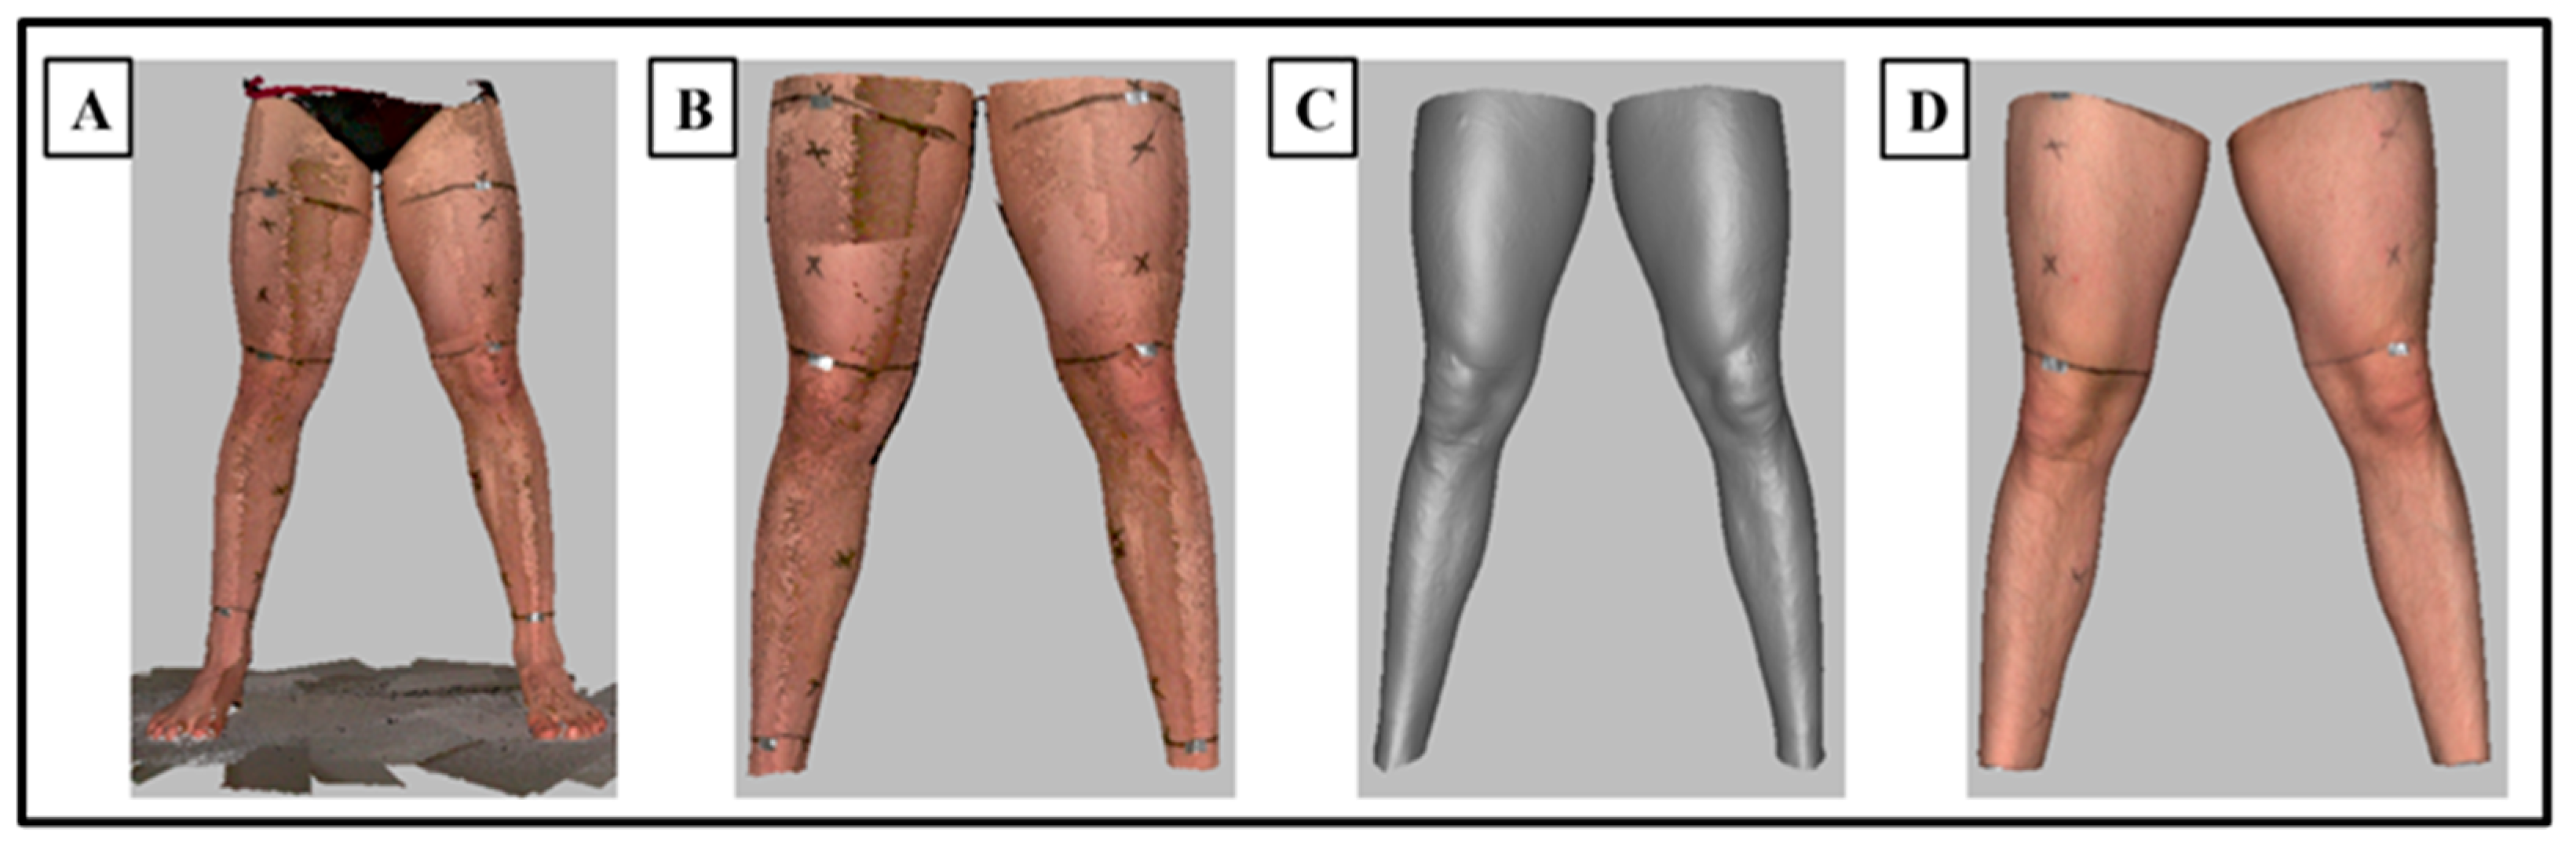 Digital Leg Volume Quantification: Precision Assessment of a Novel Workflow  Based on Single Capture Three-dimensional Whole-Body Surface Imaging